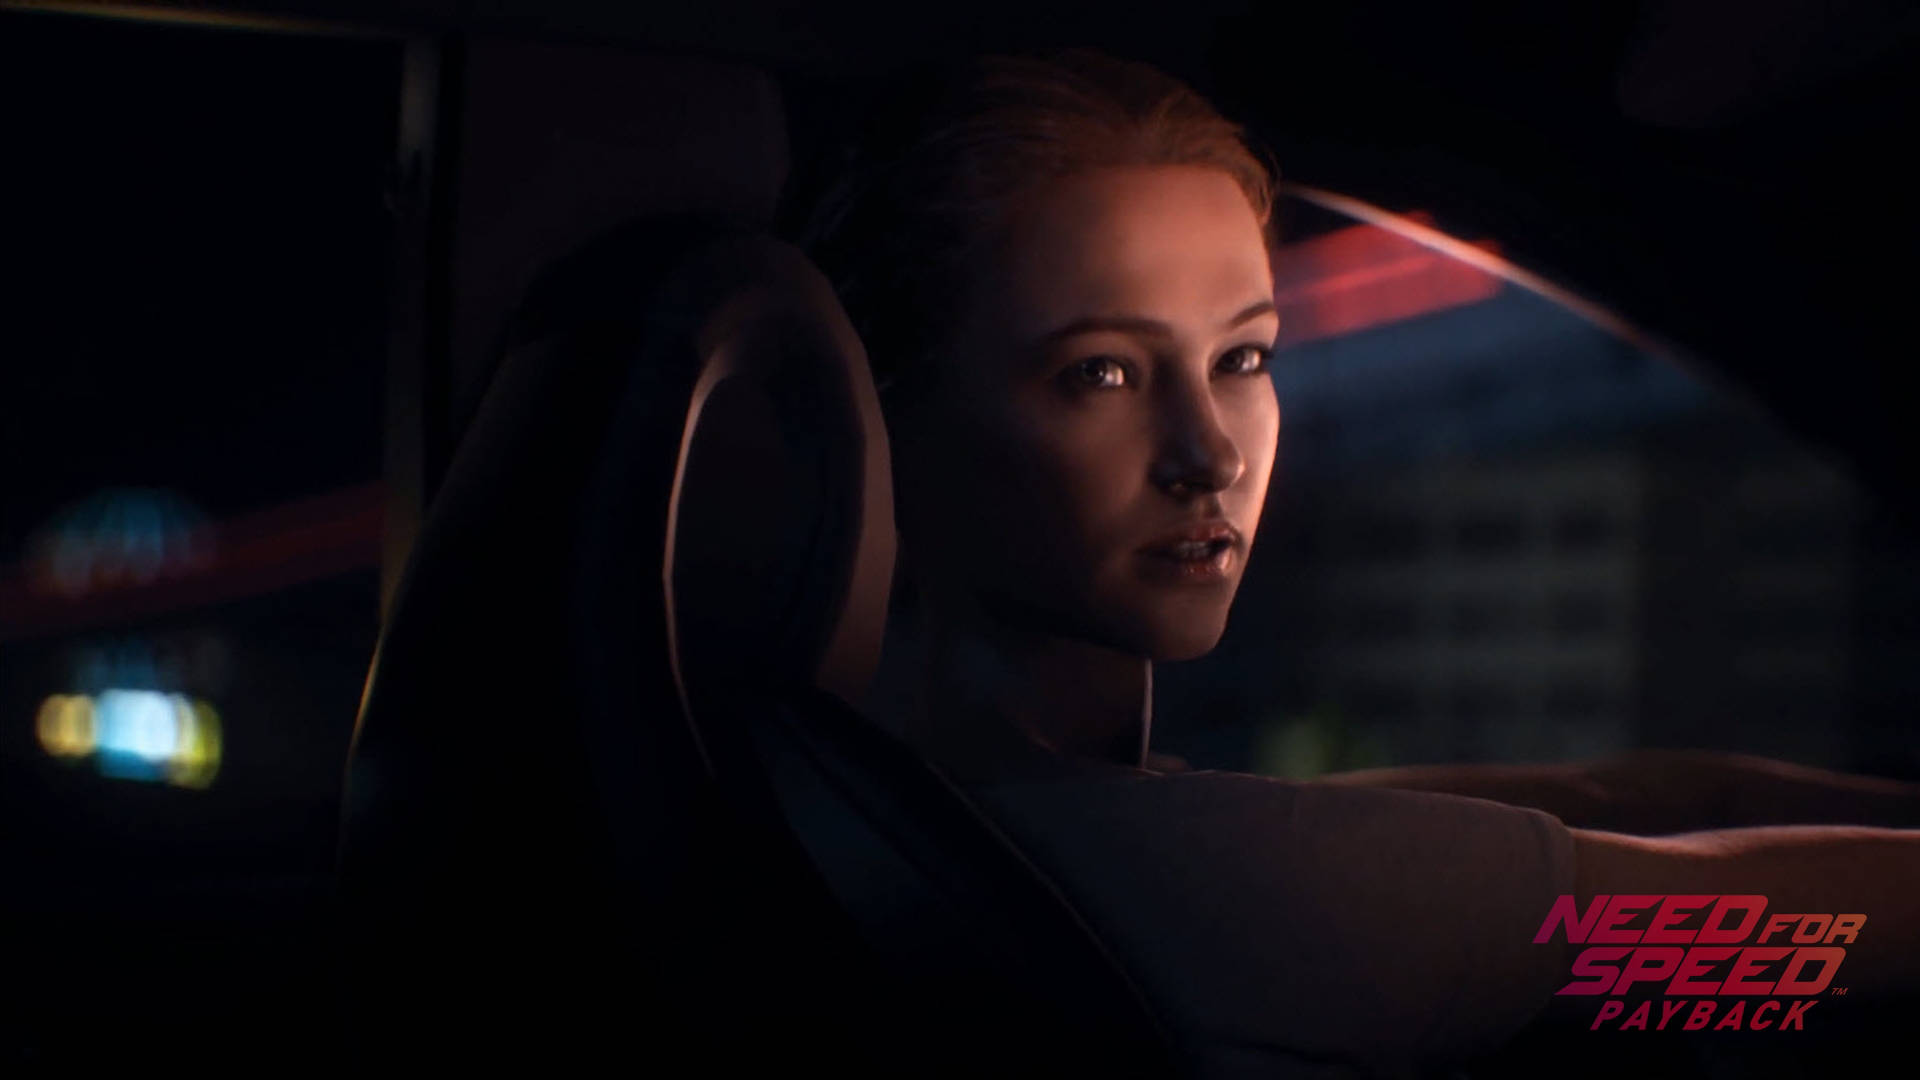 Jessica Miller In High-action Racing In Need For Speed Payback.